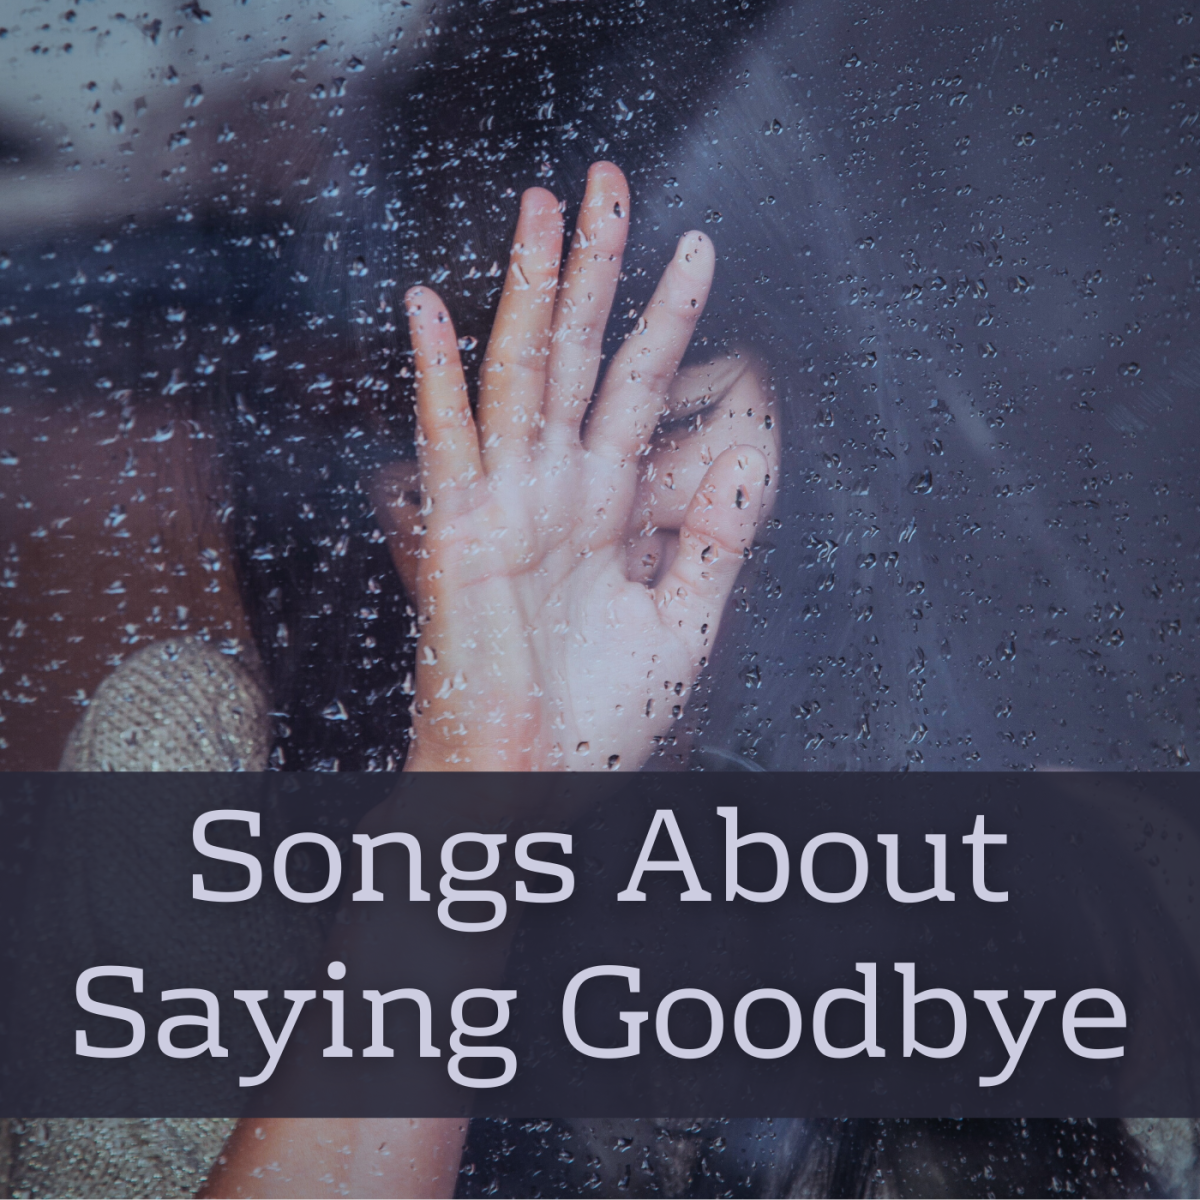 135 Songs About Saying Goodbye - Spinditty